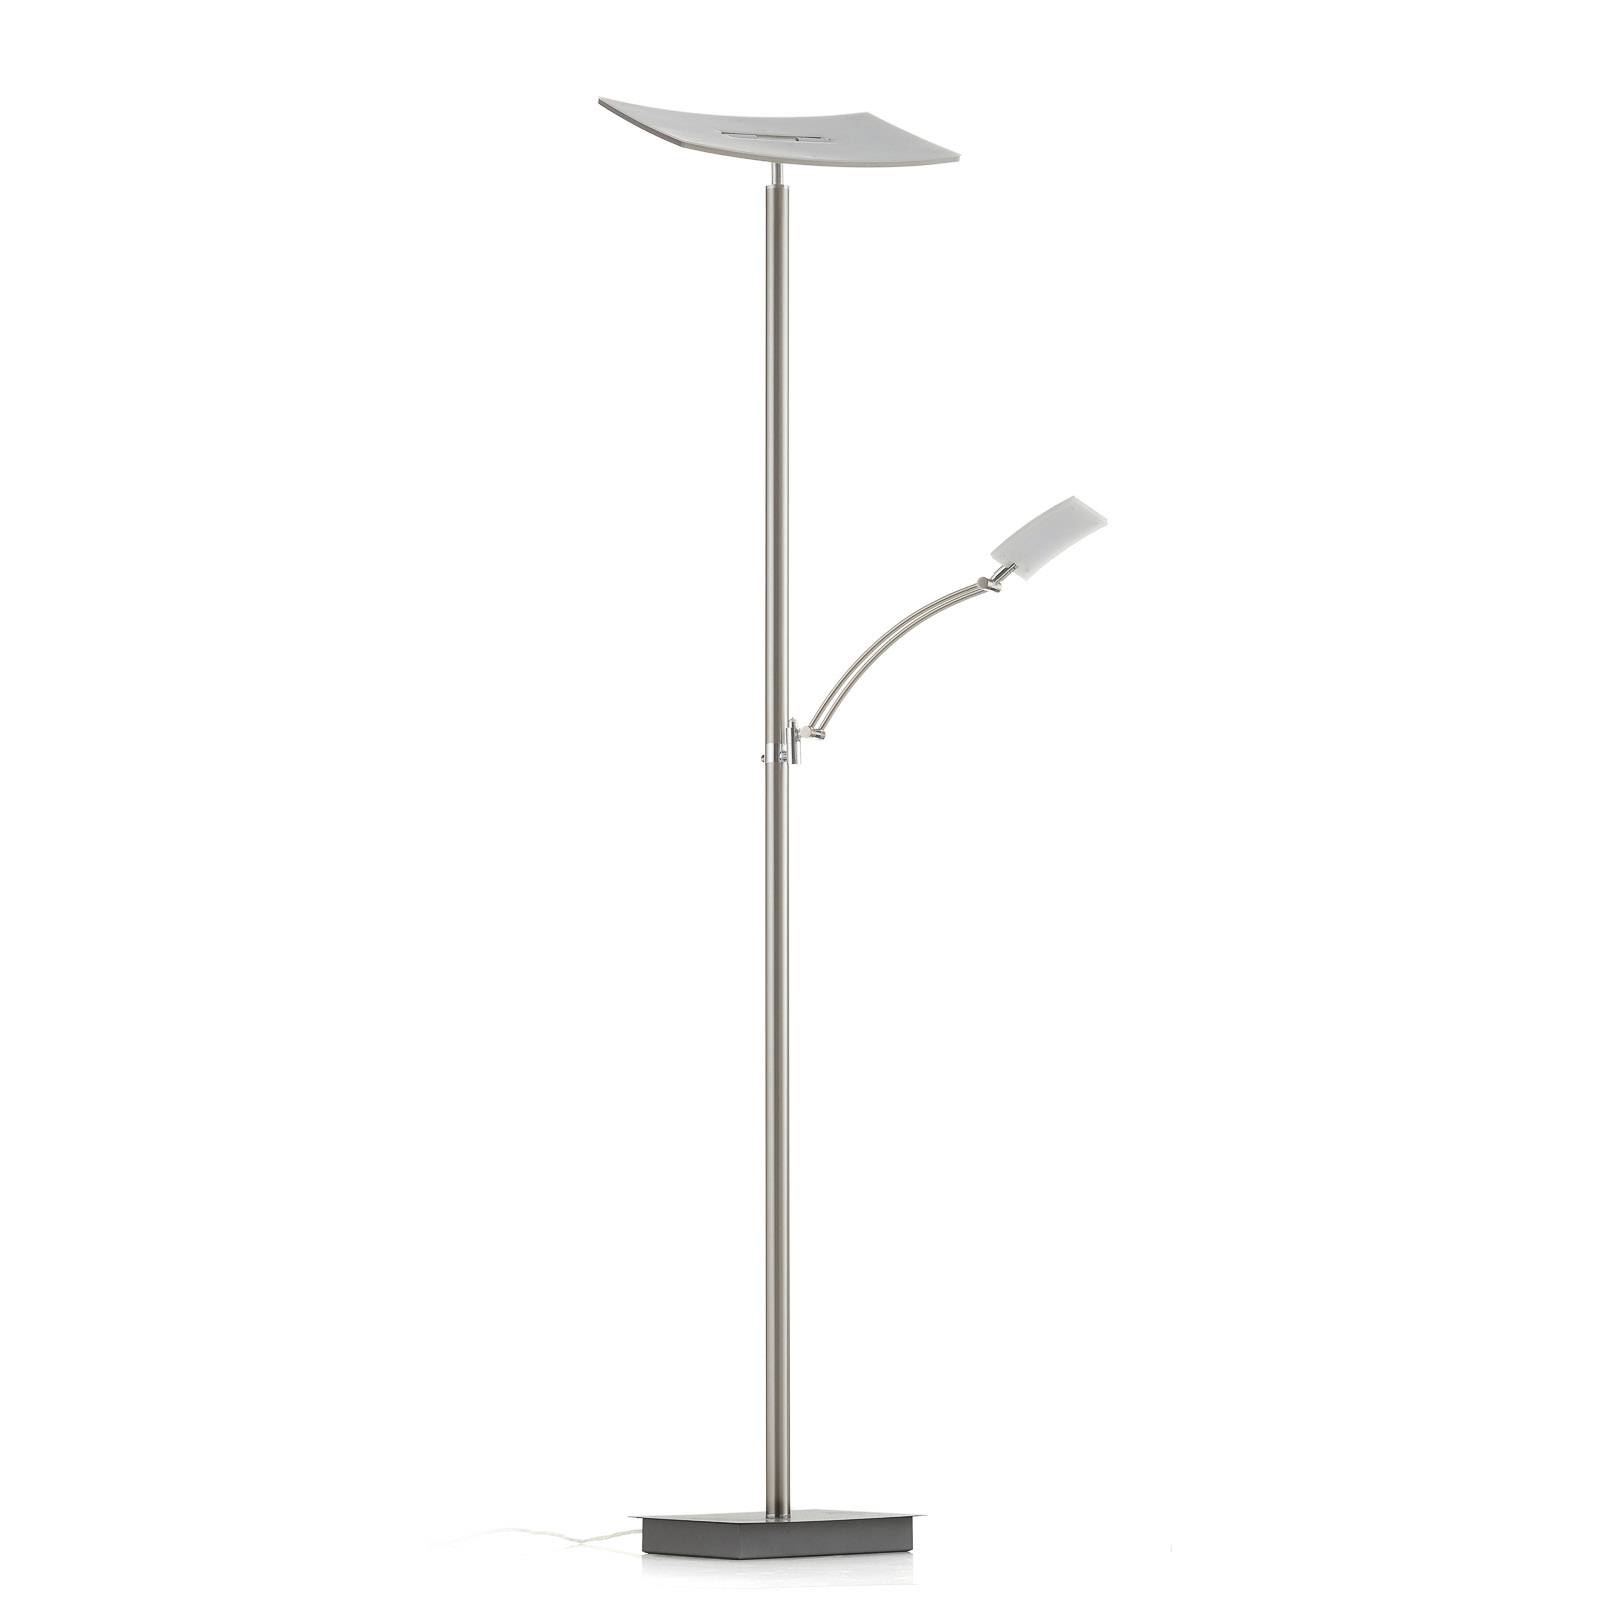 Lampe à éclairage indirect LED Modena dimmable